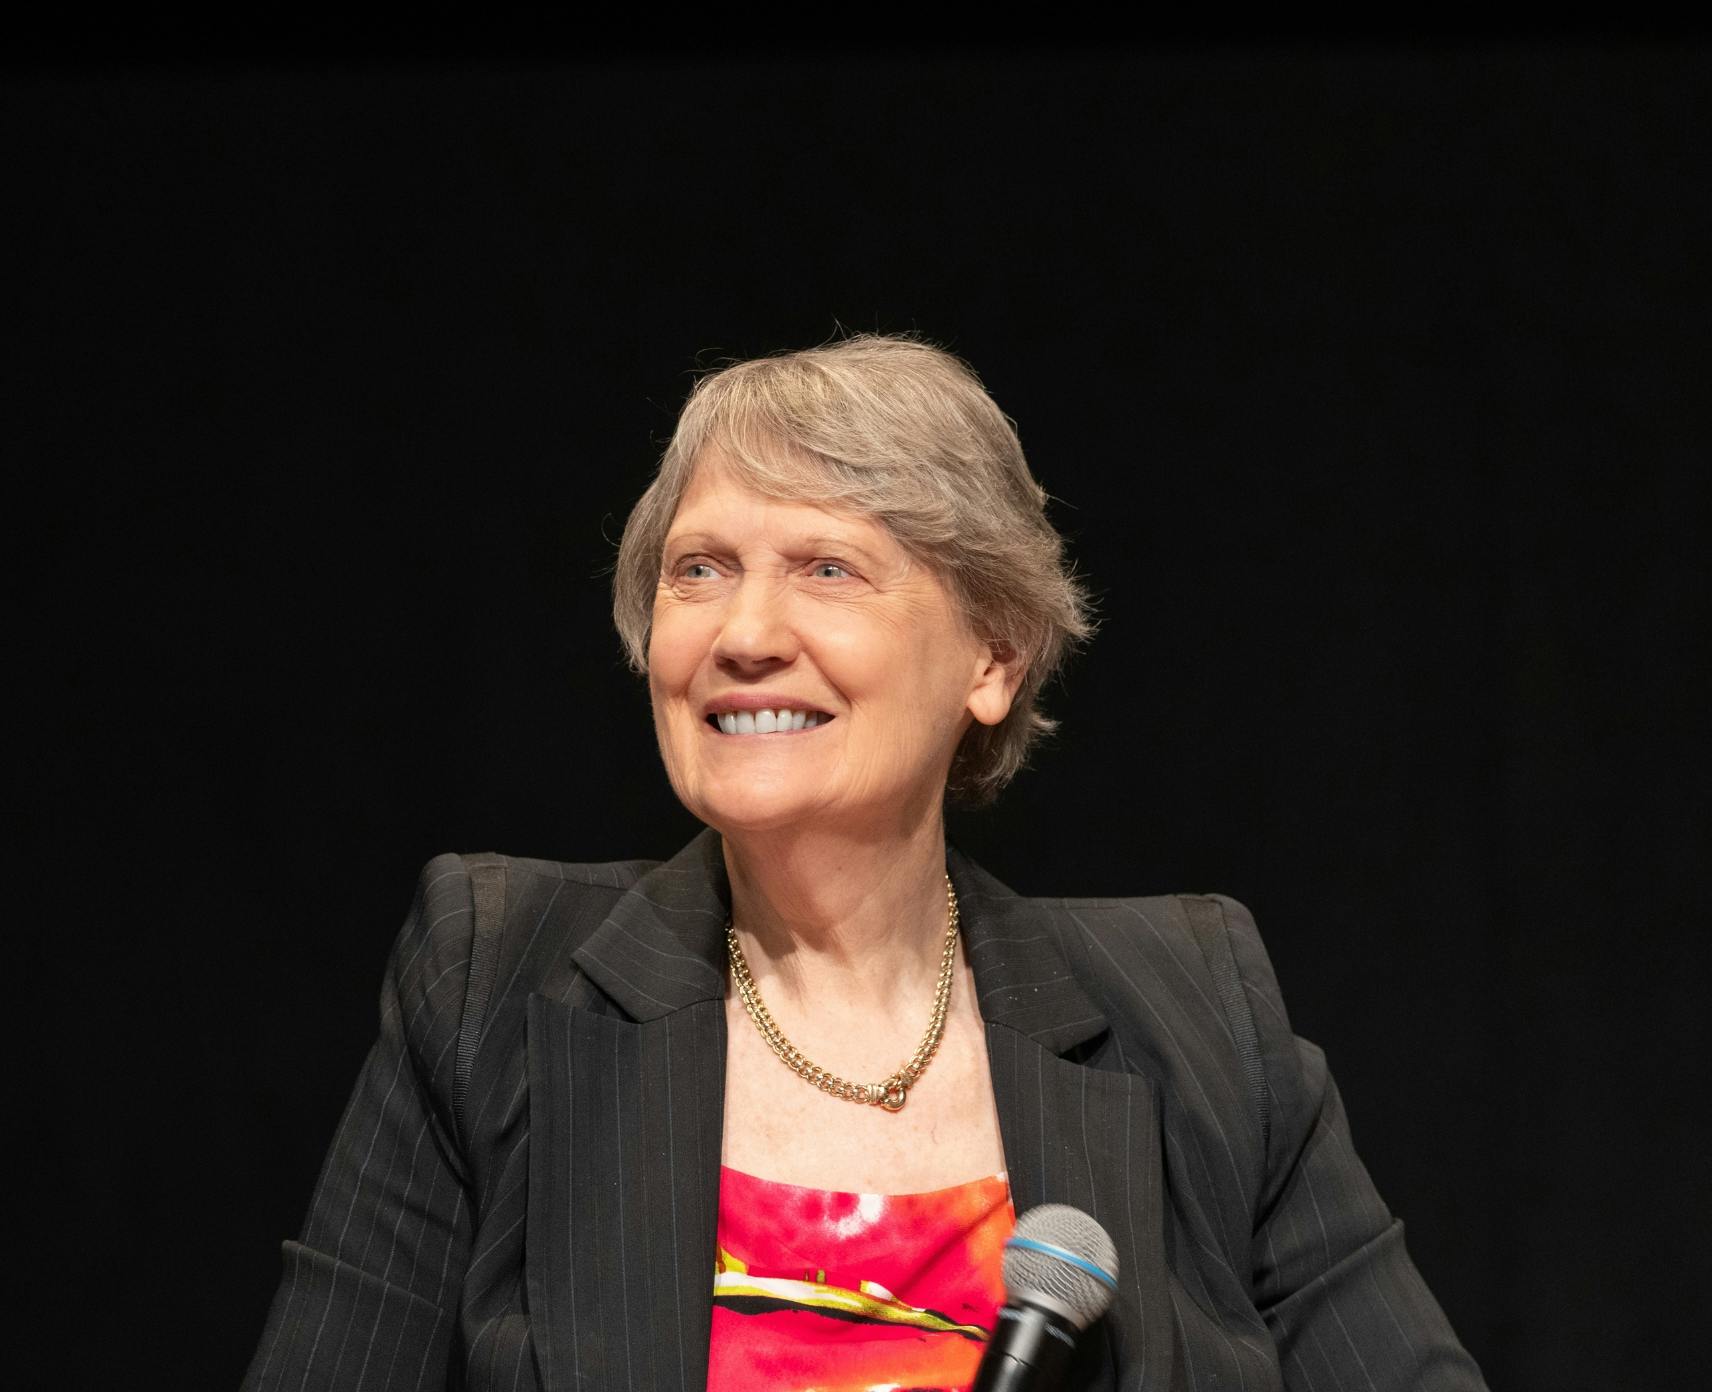 Former NZ PM Helen Clark: ‘Raise issues, never give up.’ article image